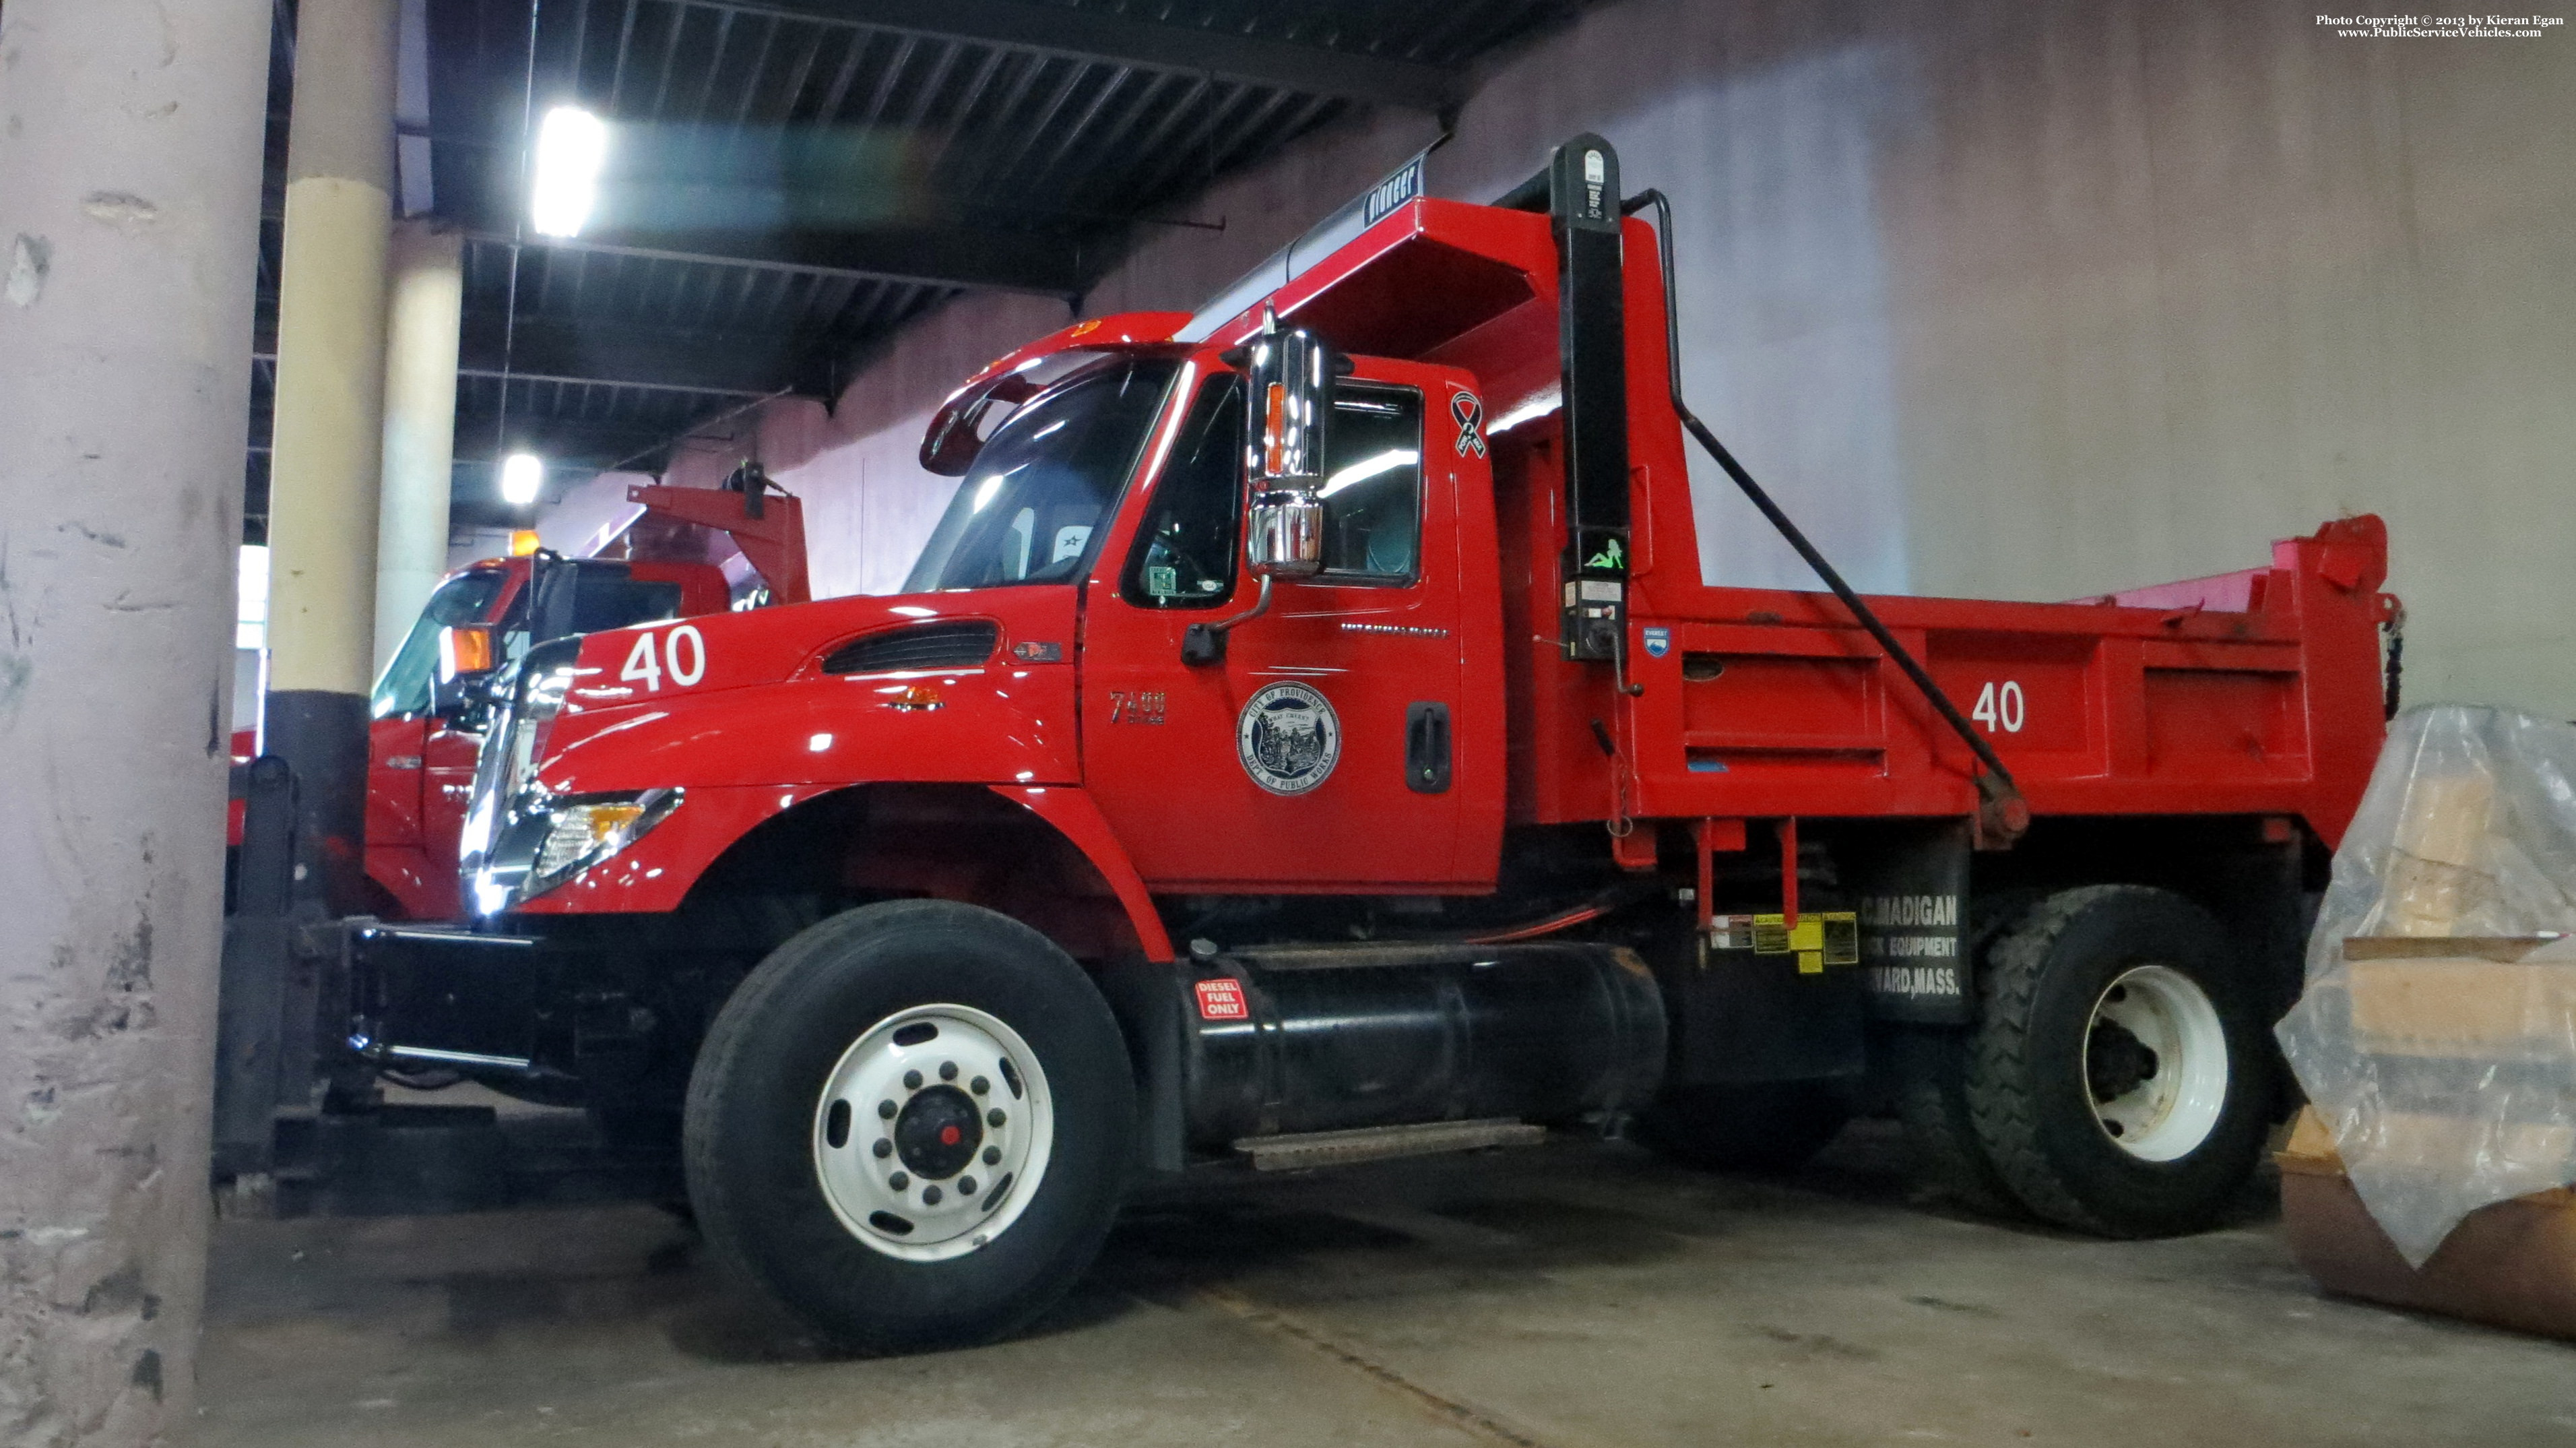 A photo  of Providence Highway Division
            Truck 40, a 2002-2013 International 7400             taken by Kieran Egan